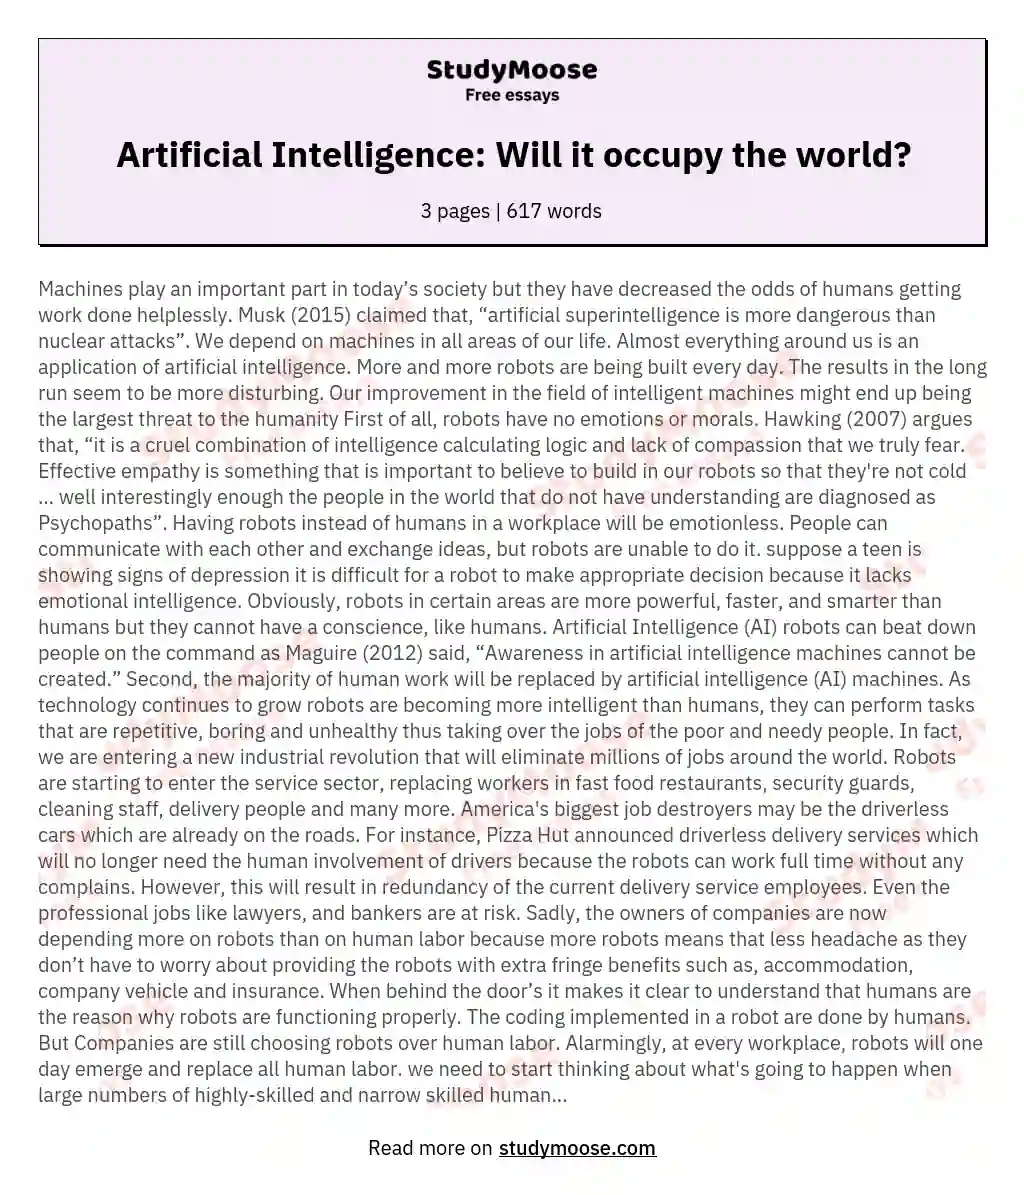 Artificial Intelligence: Will it occupy the world? essay